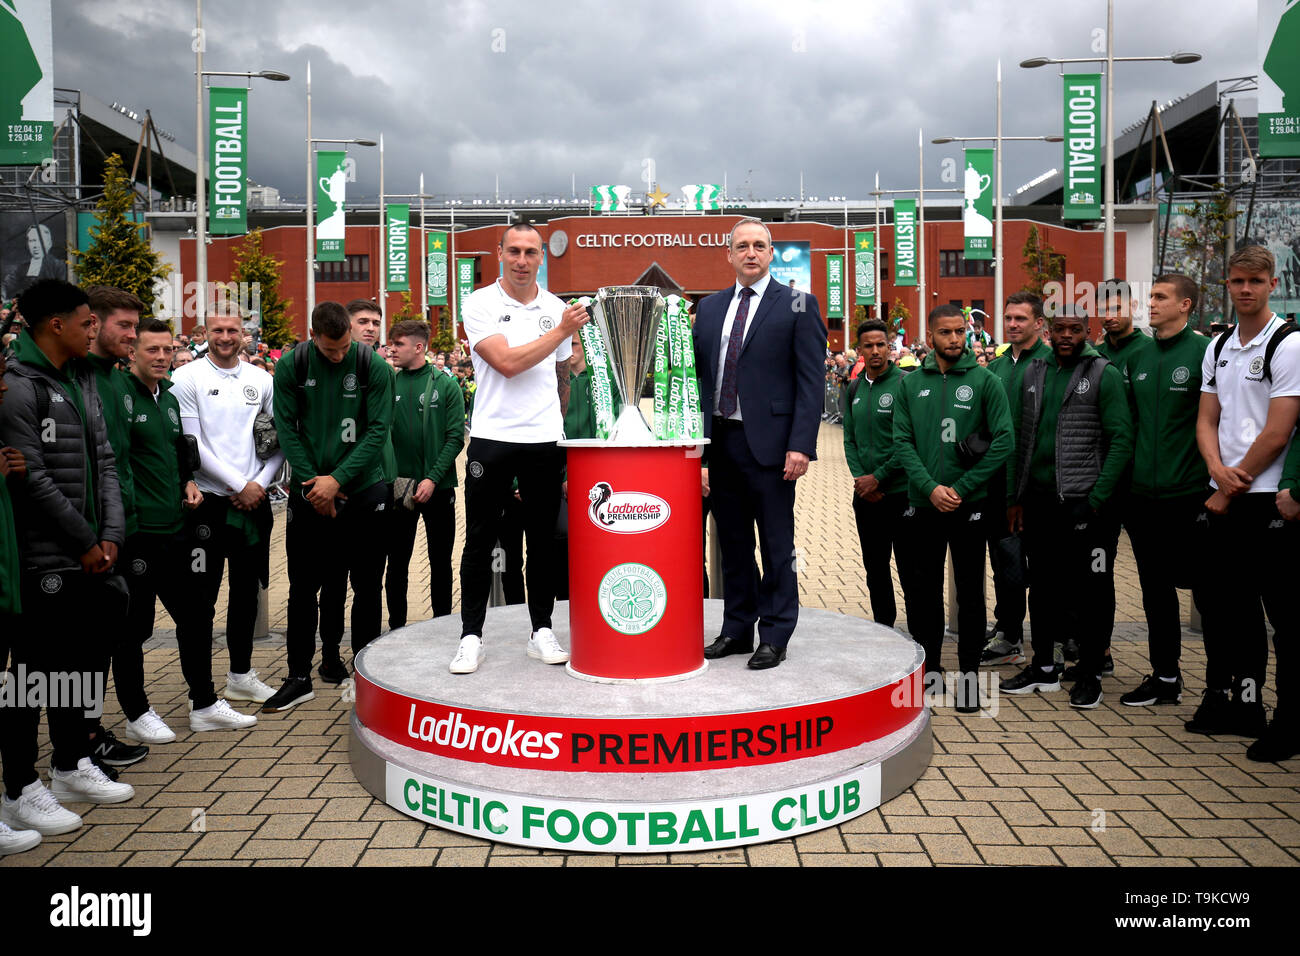 Former Celtic player Paul McStay (right) and Celtic's Scott Brown with the Ladbrokes Scottish Premiership cup trophy prior to the beginning of the Ladbrokes Scottish Premiership match at Celtic Park, Glasgow. Stock Photo